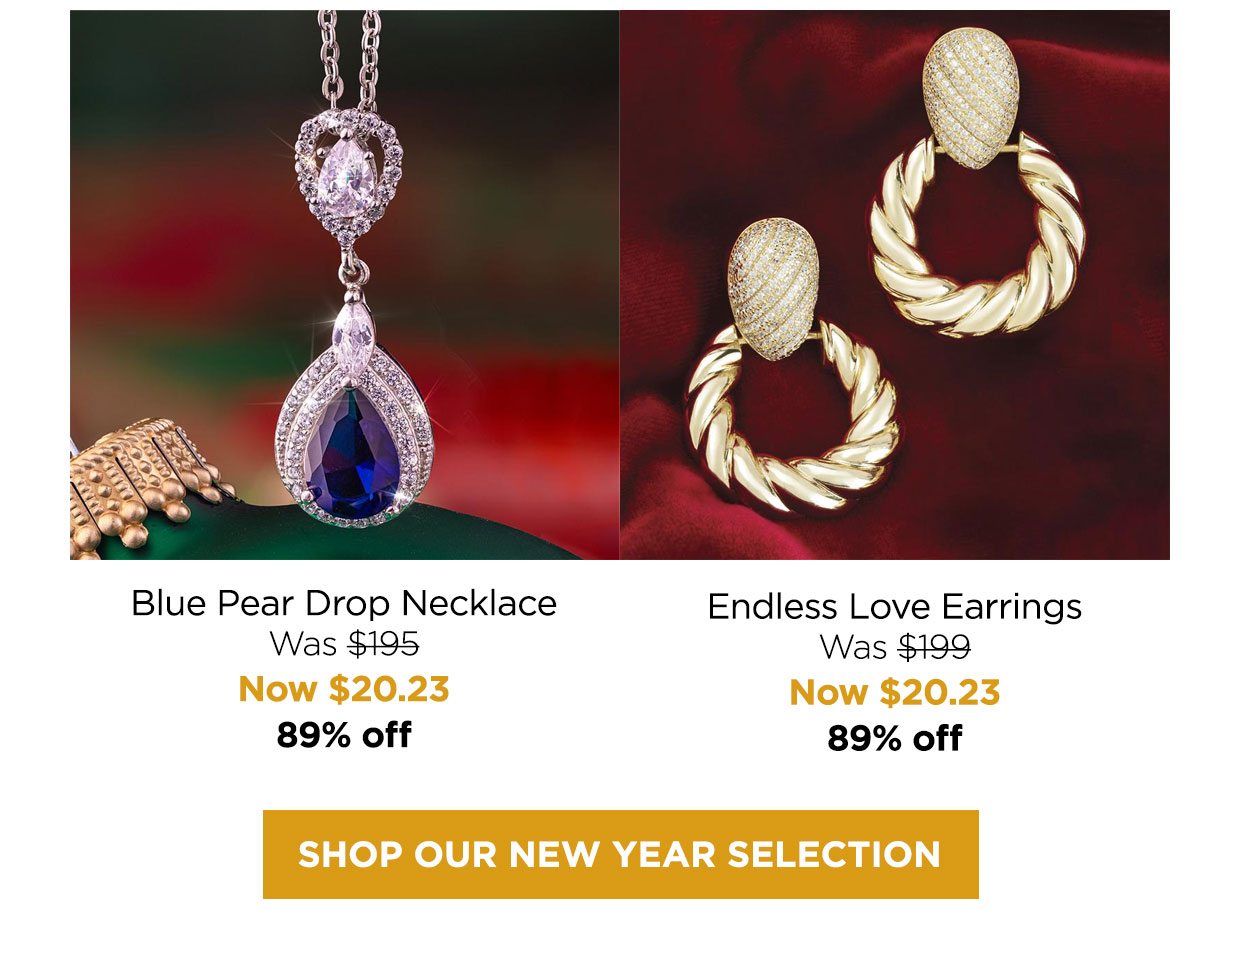 Blue Pear Drop Necklace Was $195, Now $20.23, 89% off. Endless Love Earrings Was $199, Now $20.23. 89% off. Shop Our New Year Selection